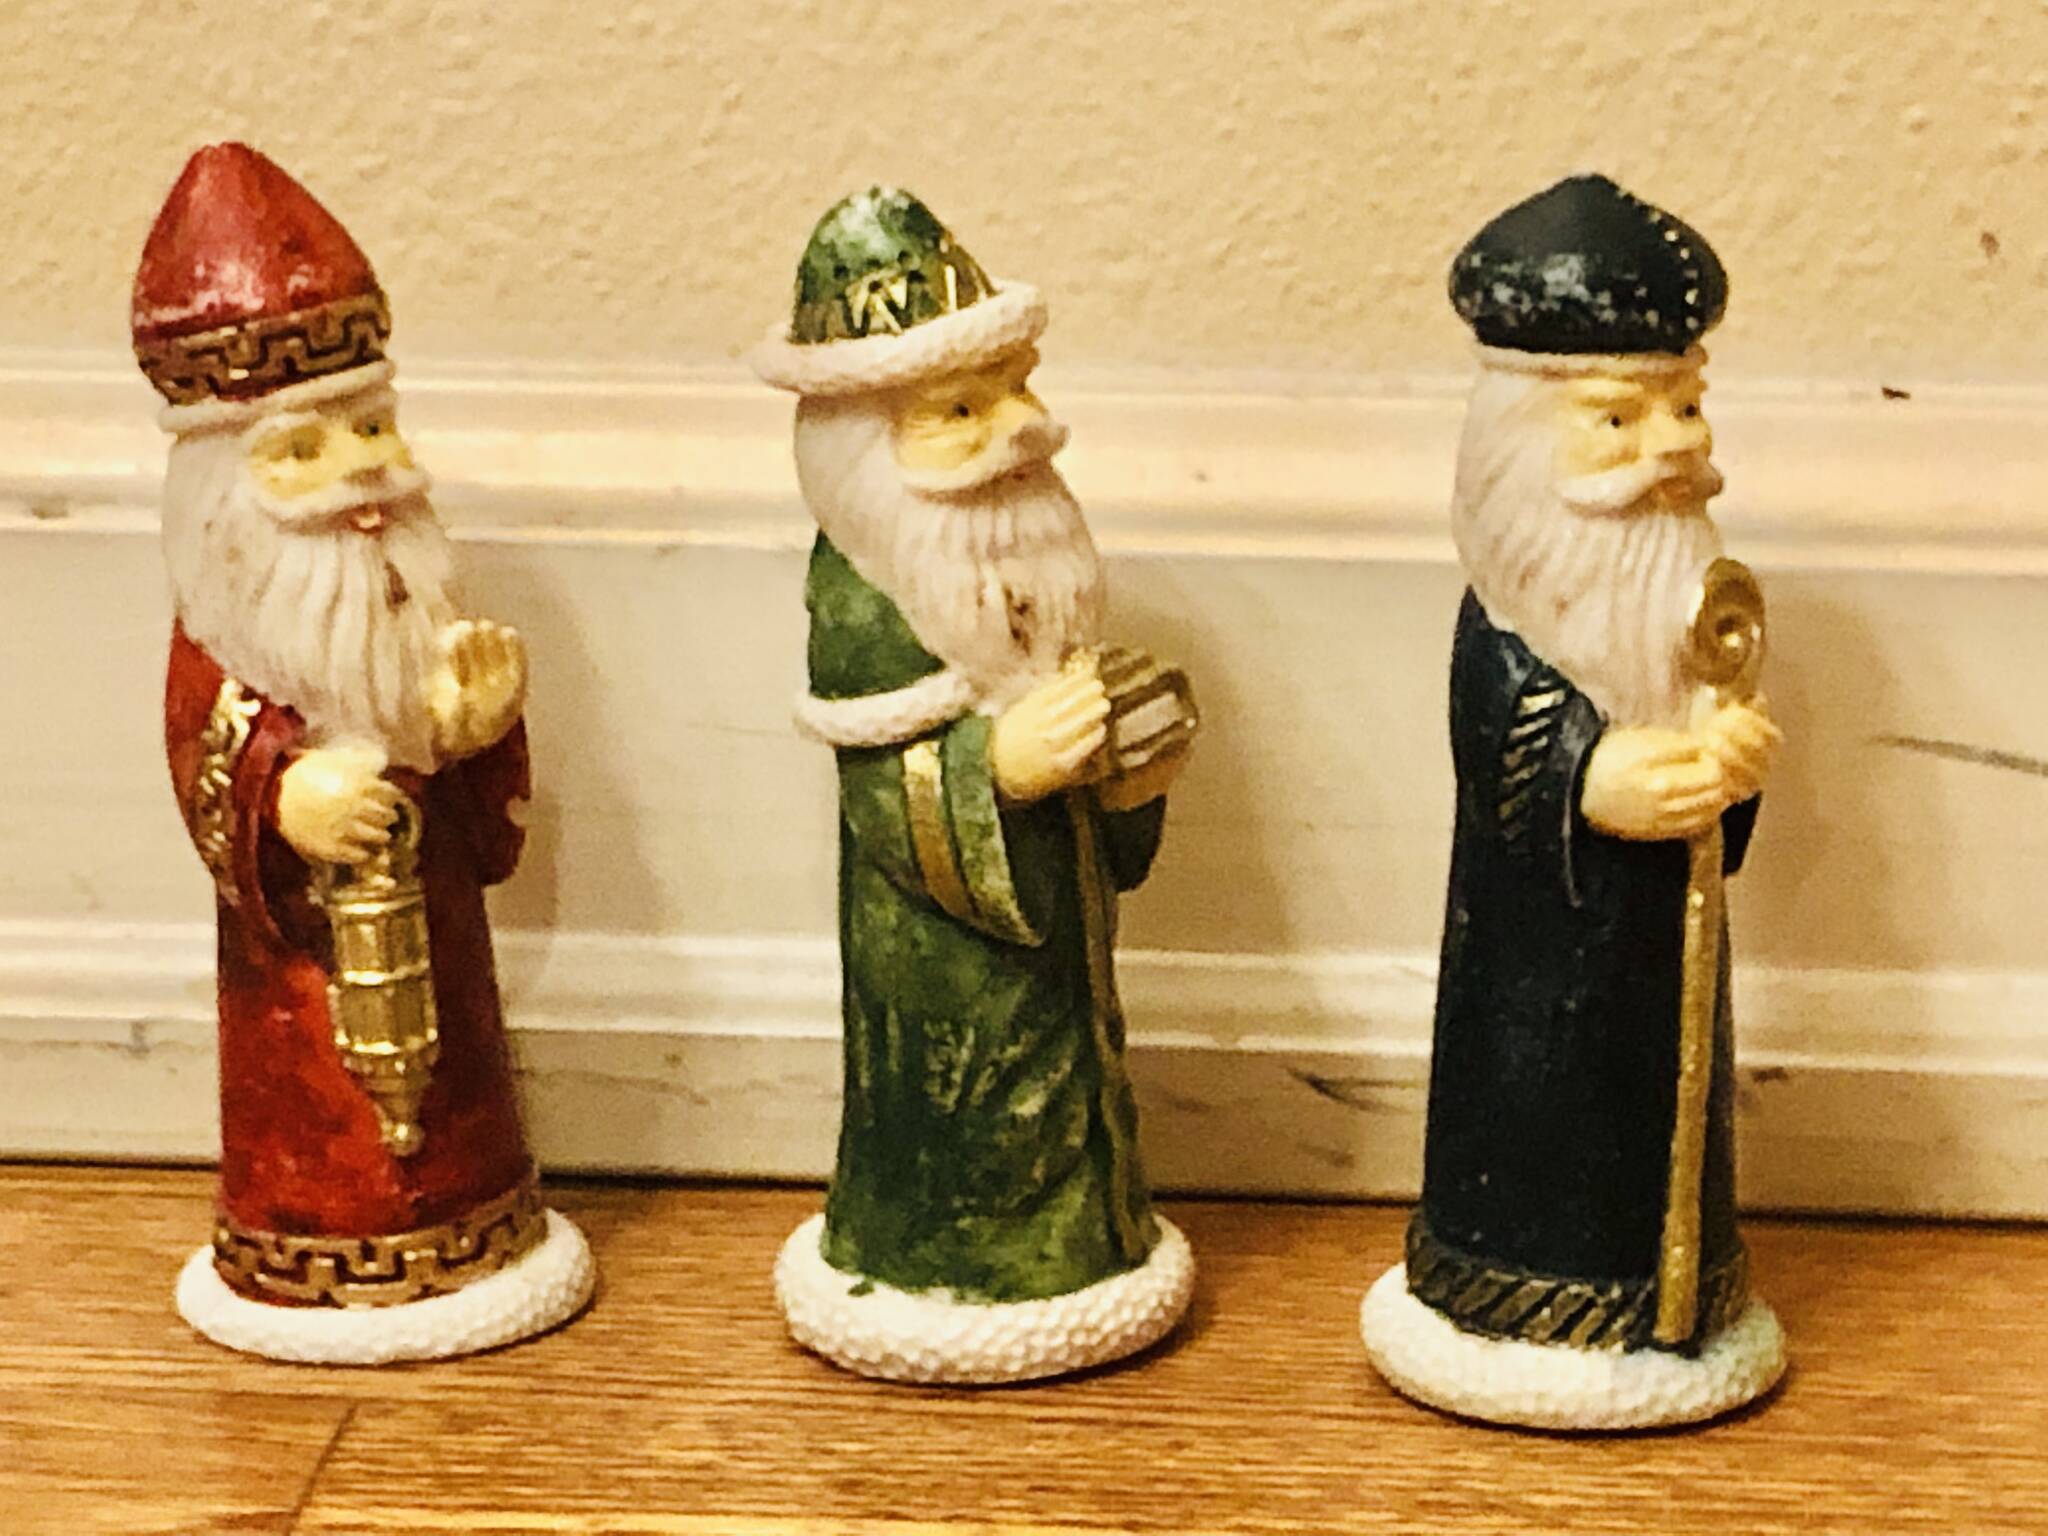 Four weeks before Christmas, three little ceramic wisemen began making a slow deliberate journey from our family room throughout the house ending up at the nativity scene atop our piano in the living room. Courtesy photo